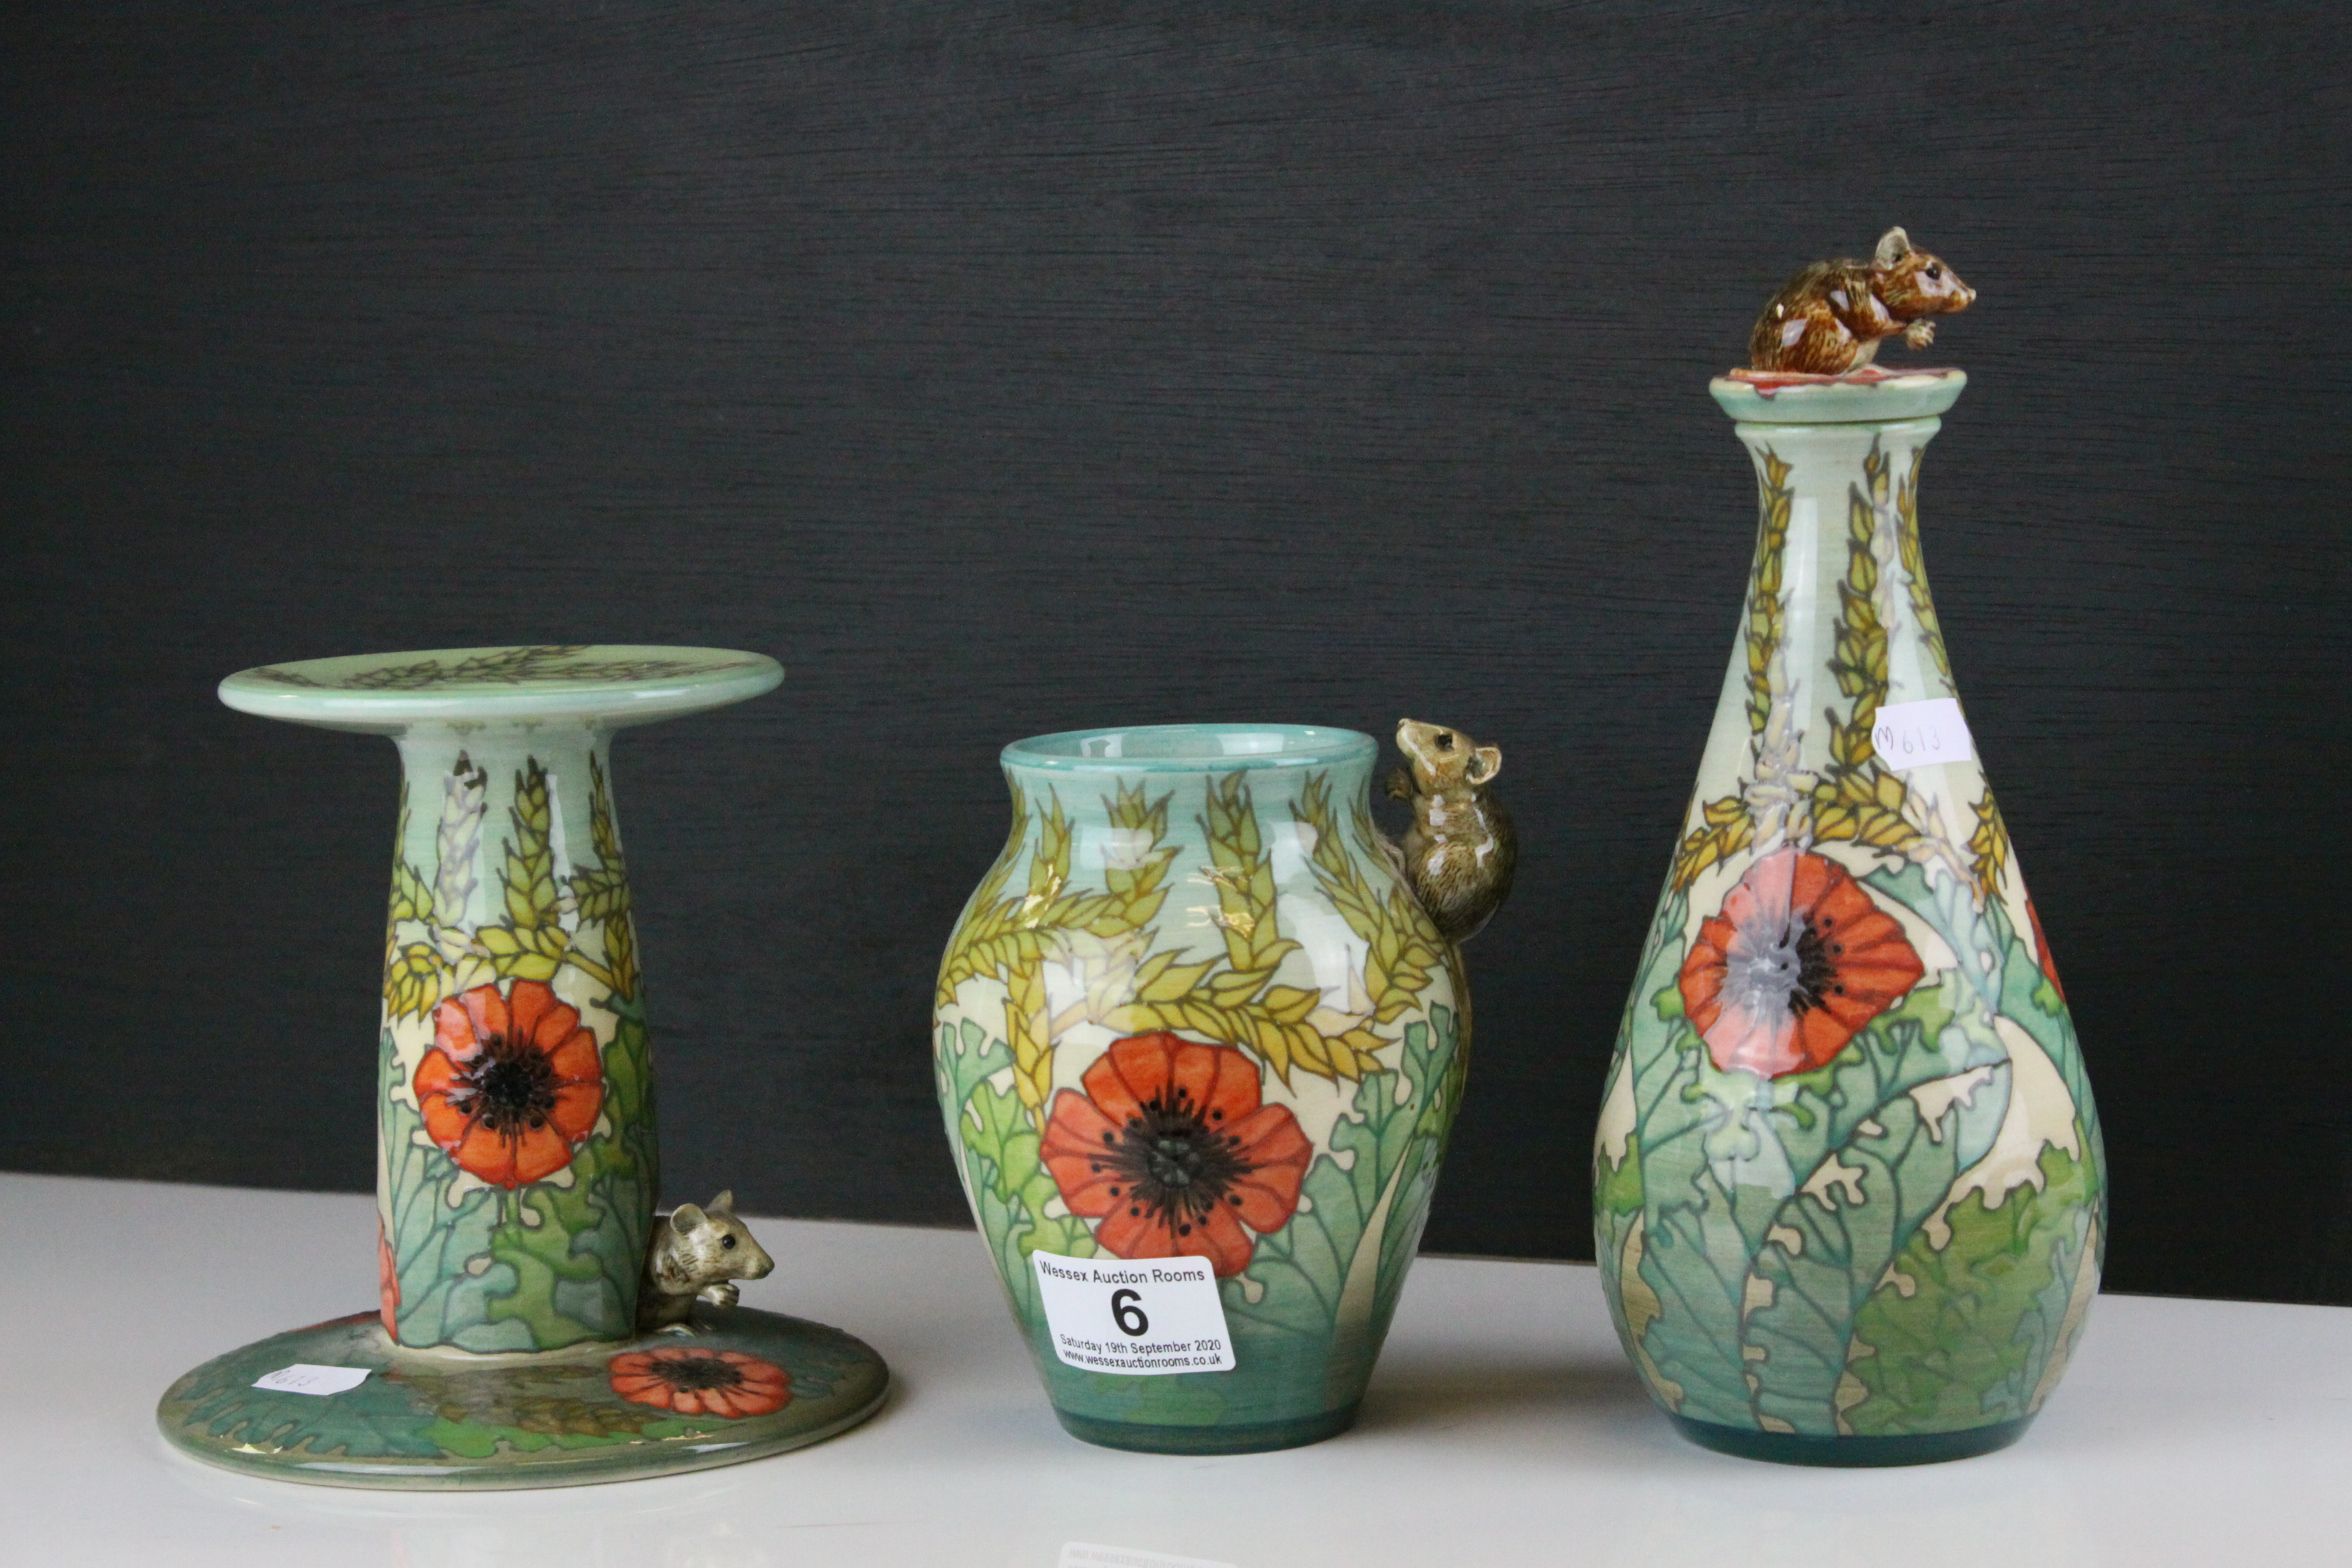 Dennis China Works ' Poppies and Corn ' Candlestick, Vase and Bottle with Stopper, all designed by